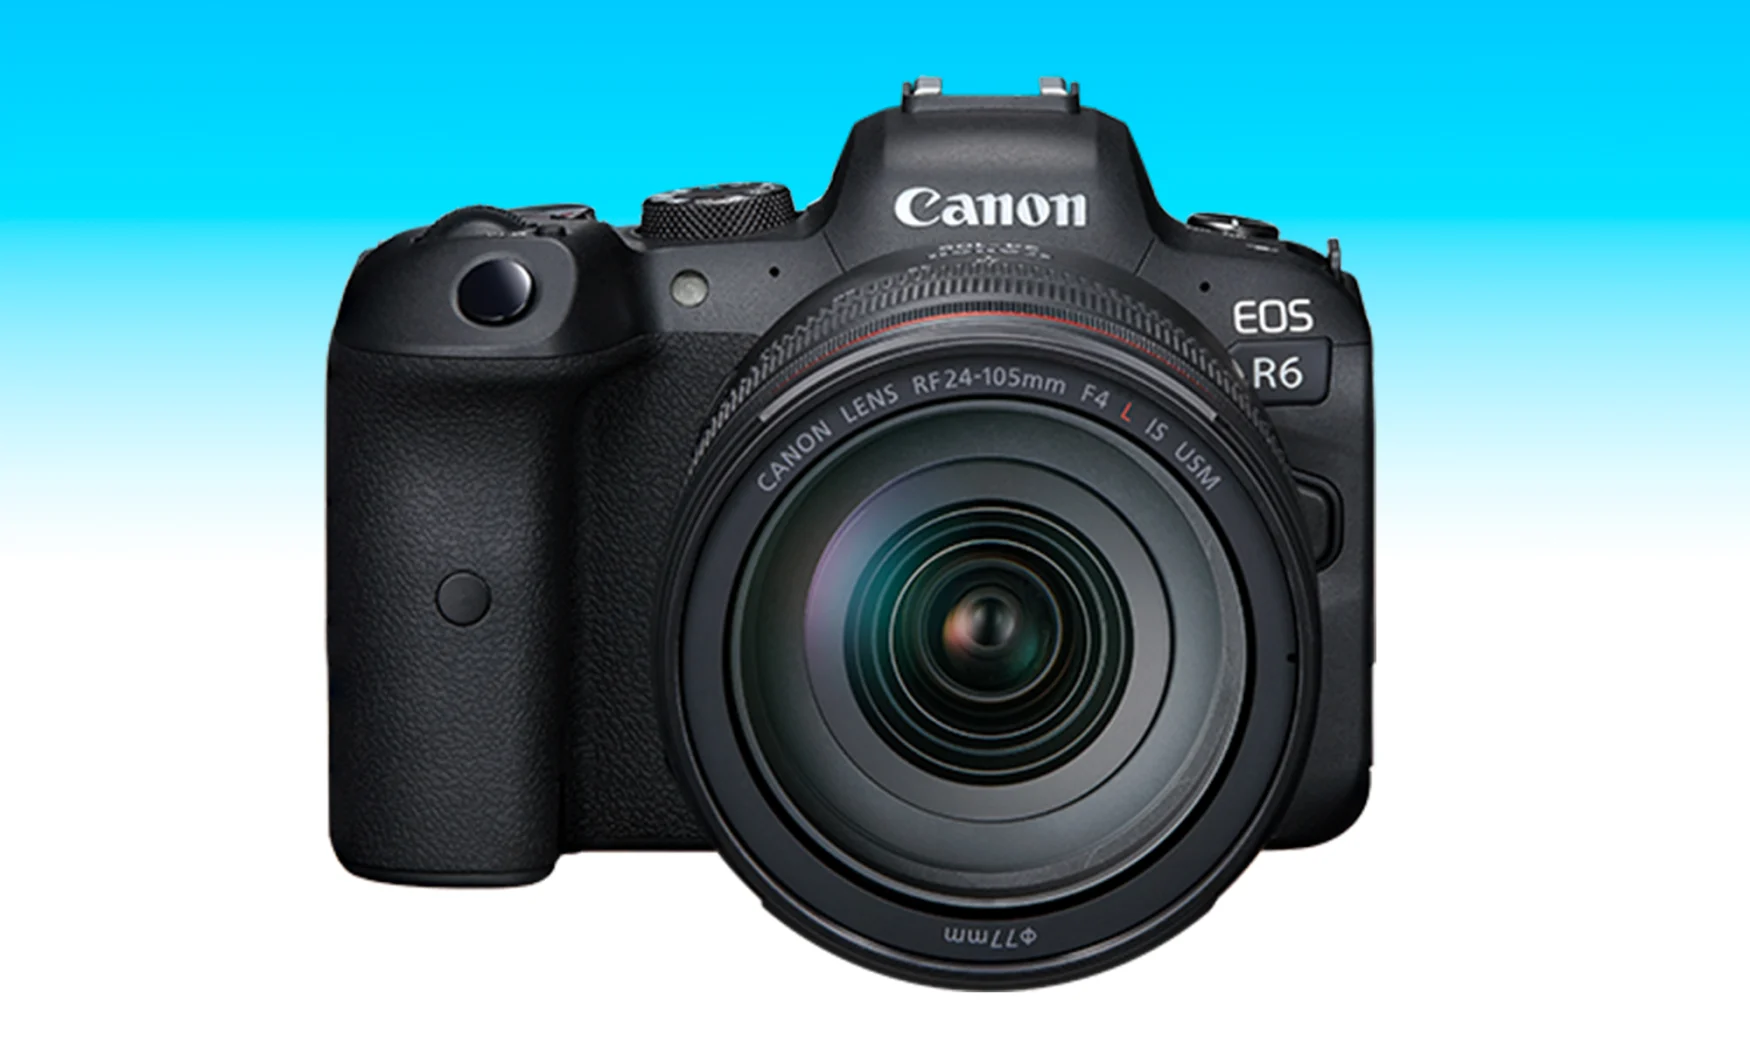 An item from the Engadget 2021 Father's Day gift guide: Canon EOS R6